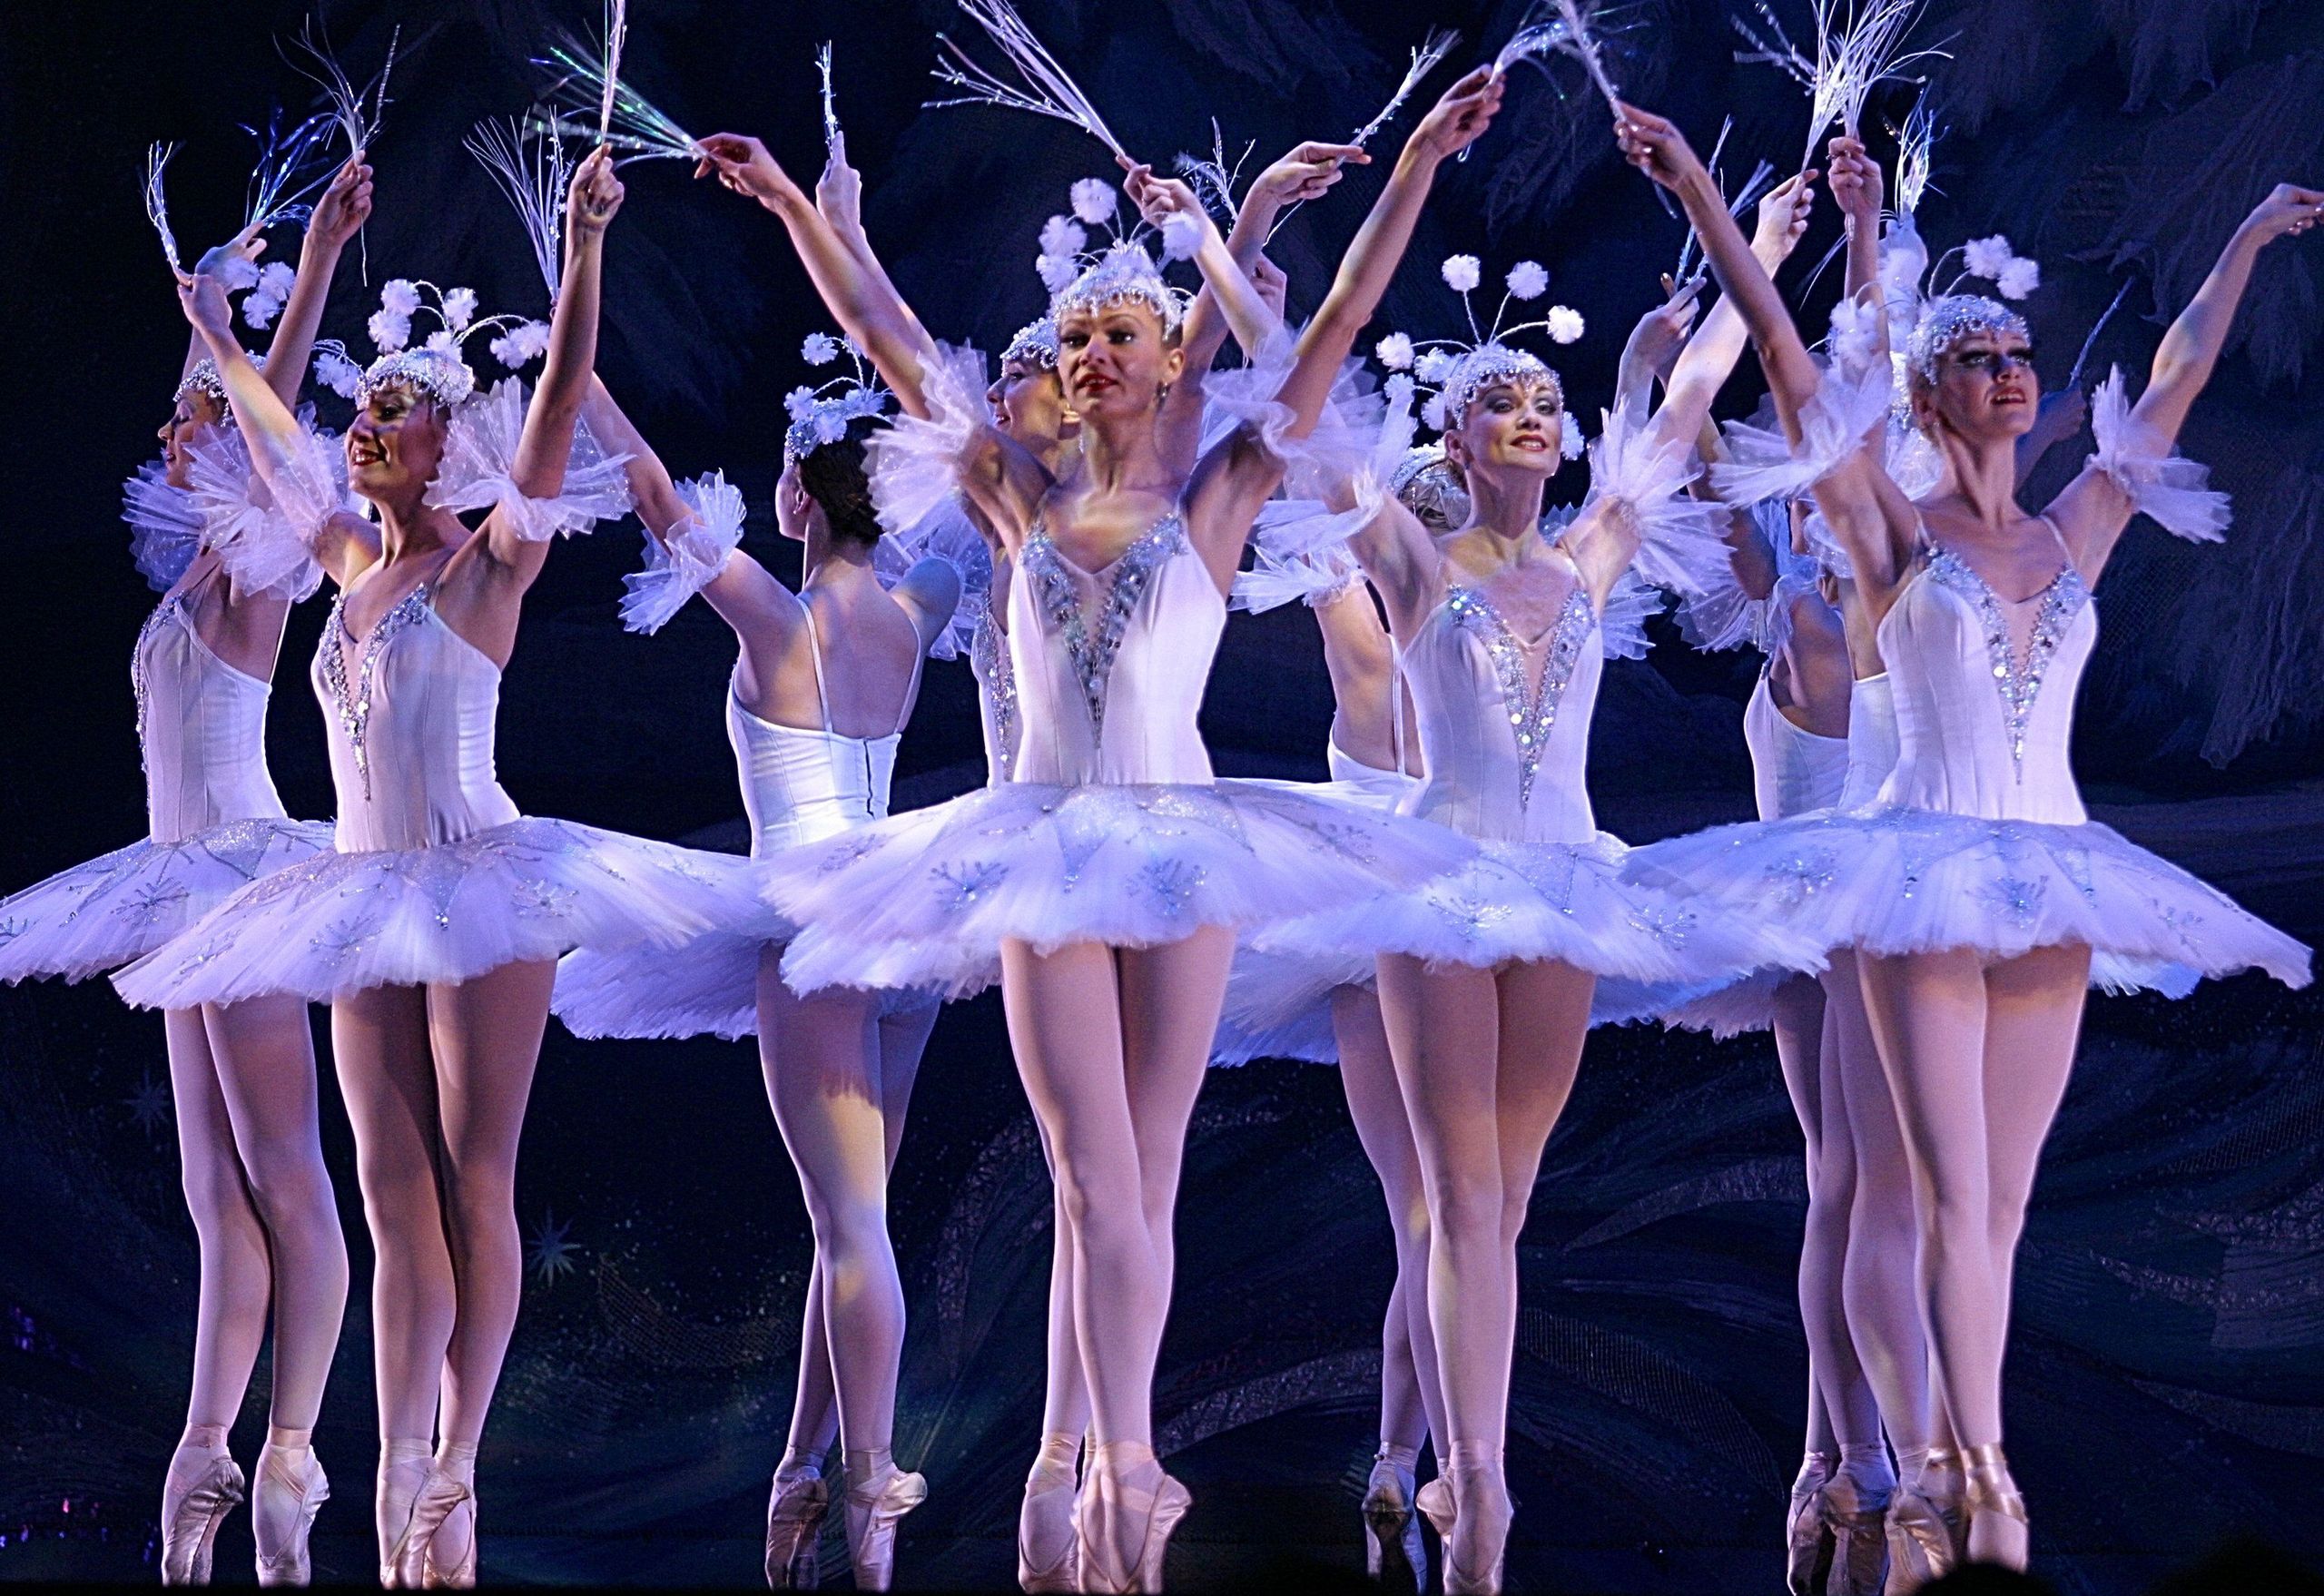 THE iCON360 BLOG: The Funniest Ballet Routine You’ll Ever See